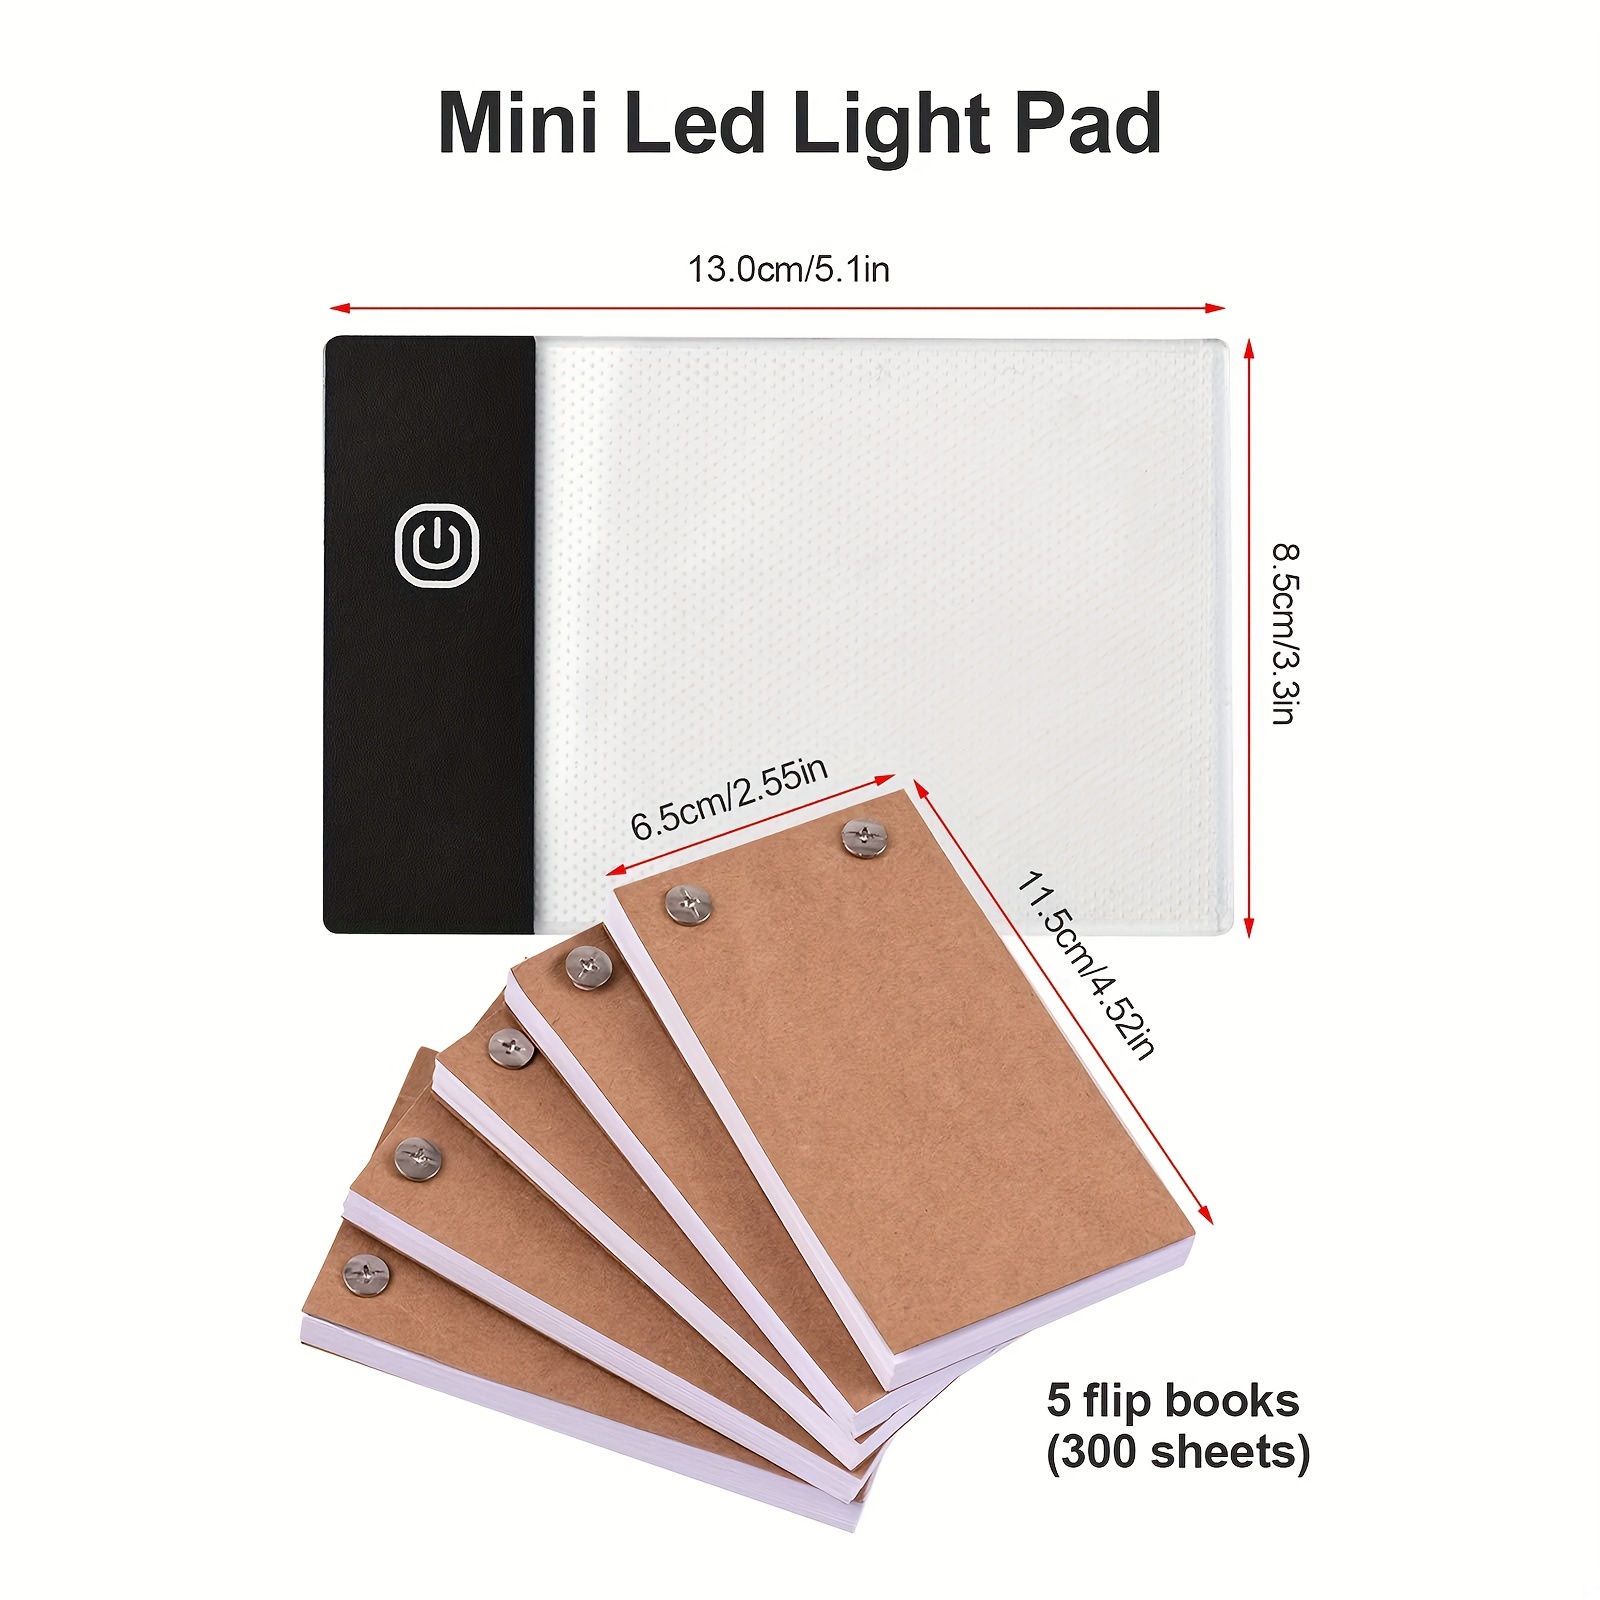 Flip Book Kit with Light Pad - A5 LED Light Board/Box & 320 Sheets Flipbook for Drawing | Tracing | Sketching, Flip Books Paper with Holes & Binding